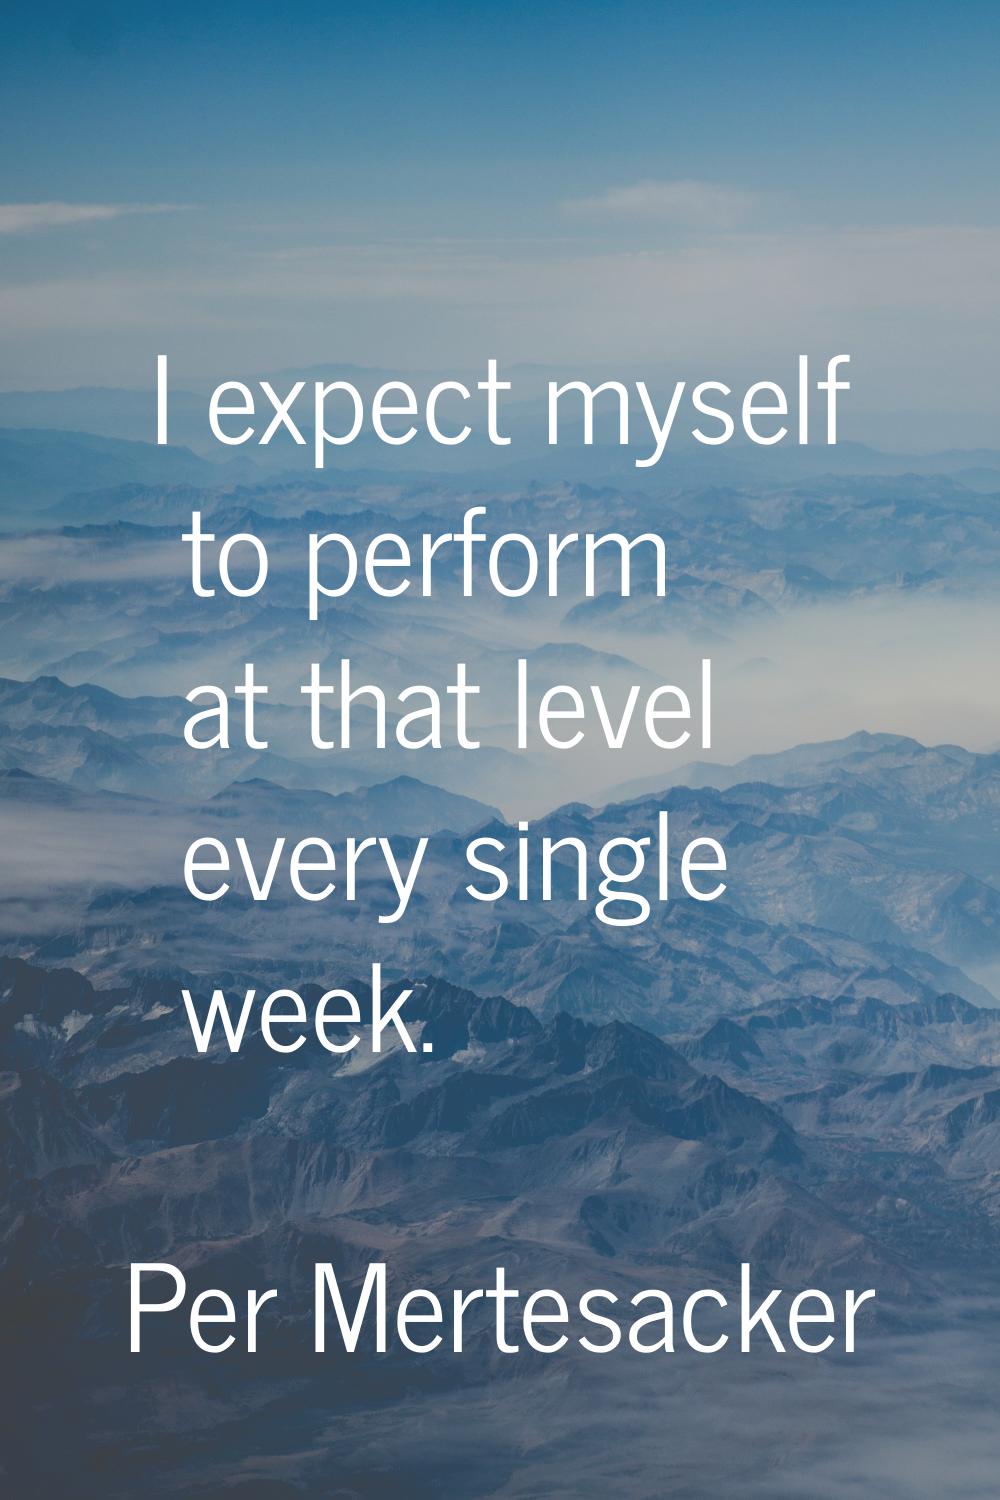 I expect myself to perform at that level every single week.